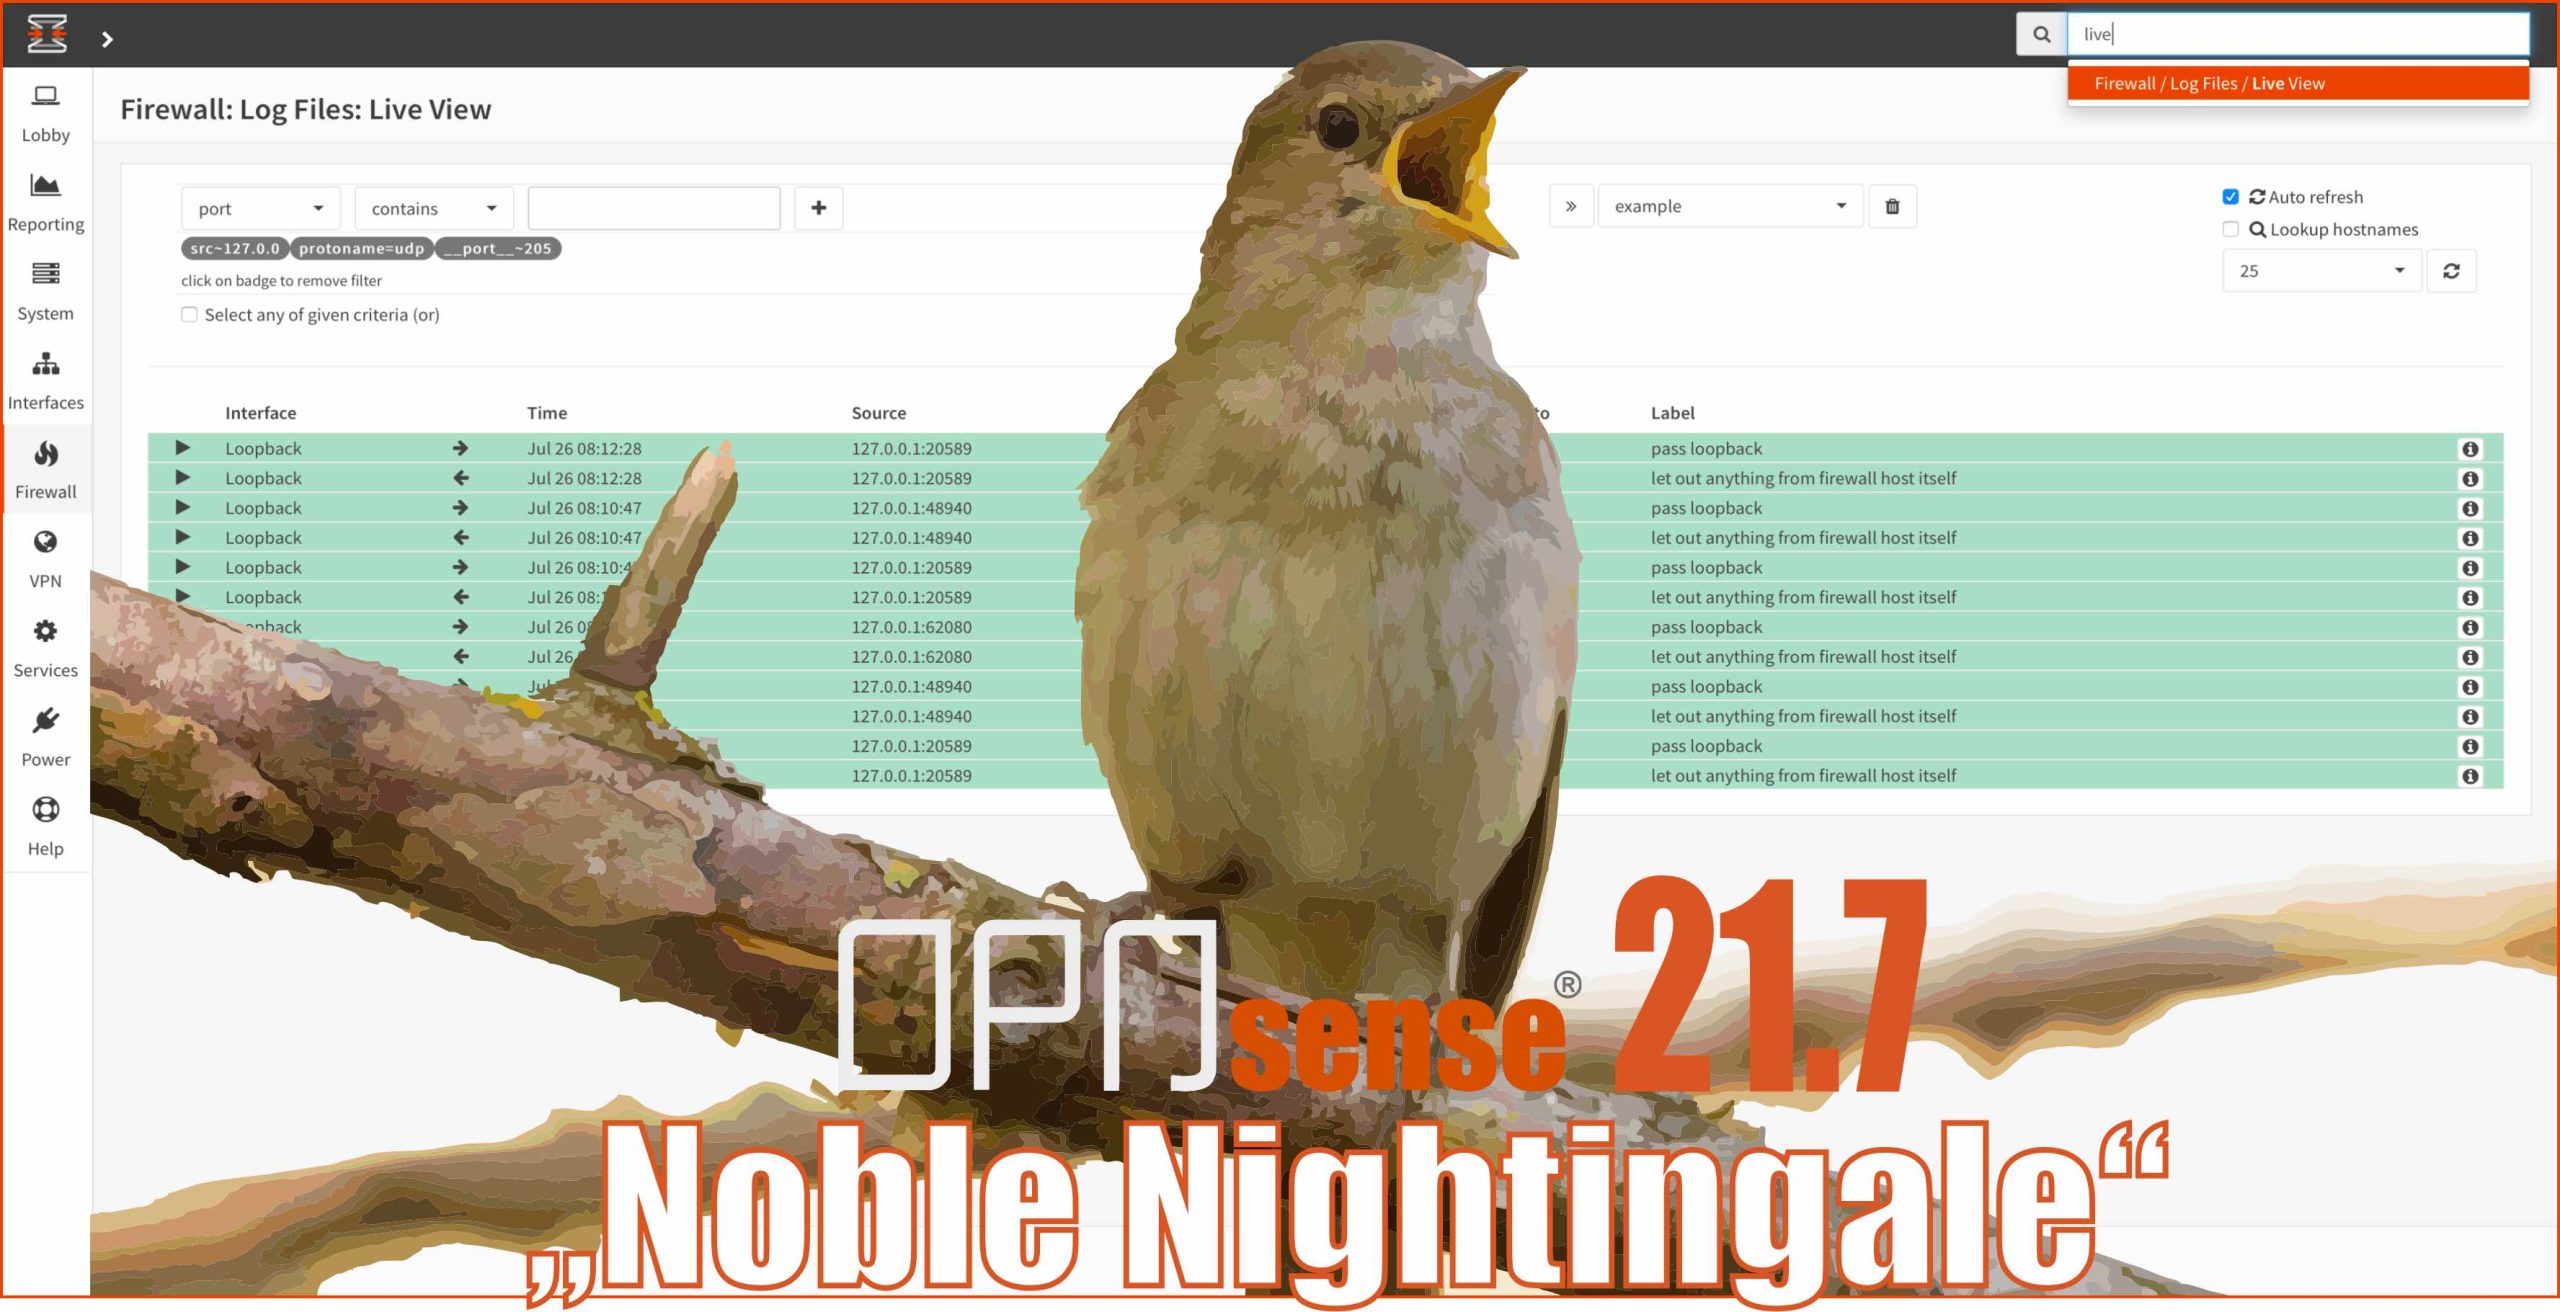 OPNsense® “Noble Nightingale” released